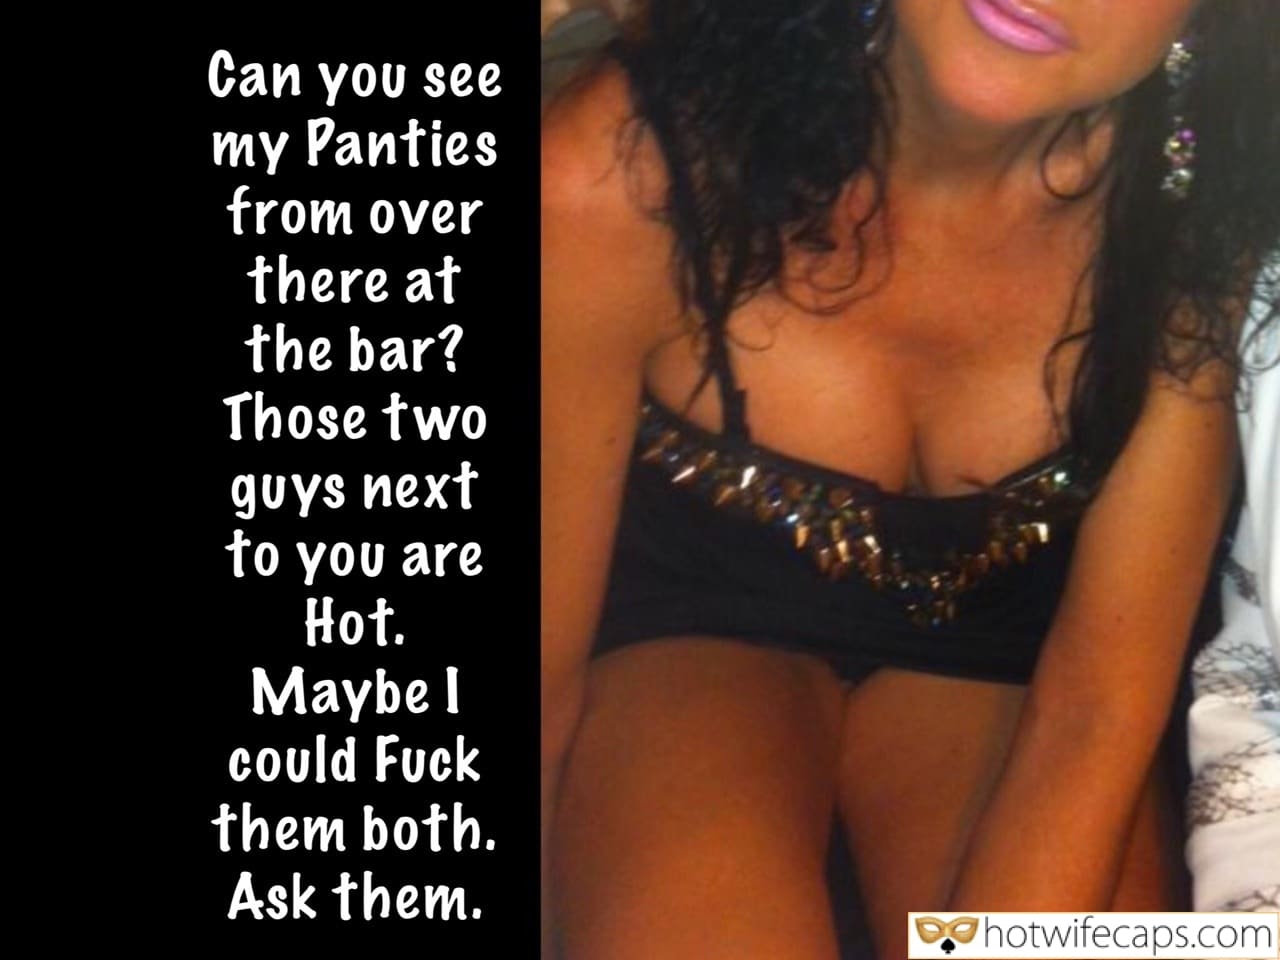 Sexy Memes No Panties Cheating Bully Bull Boss hotwife caption: Can you see my Panties from over there at the bar? Those two guys next to you are Hot. Maybe I could Fuck them both. Ask them. Little Wife in Kinky Dress